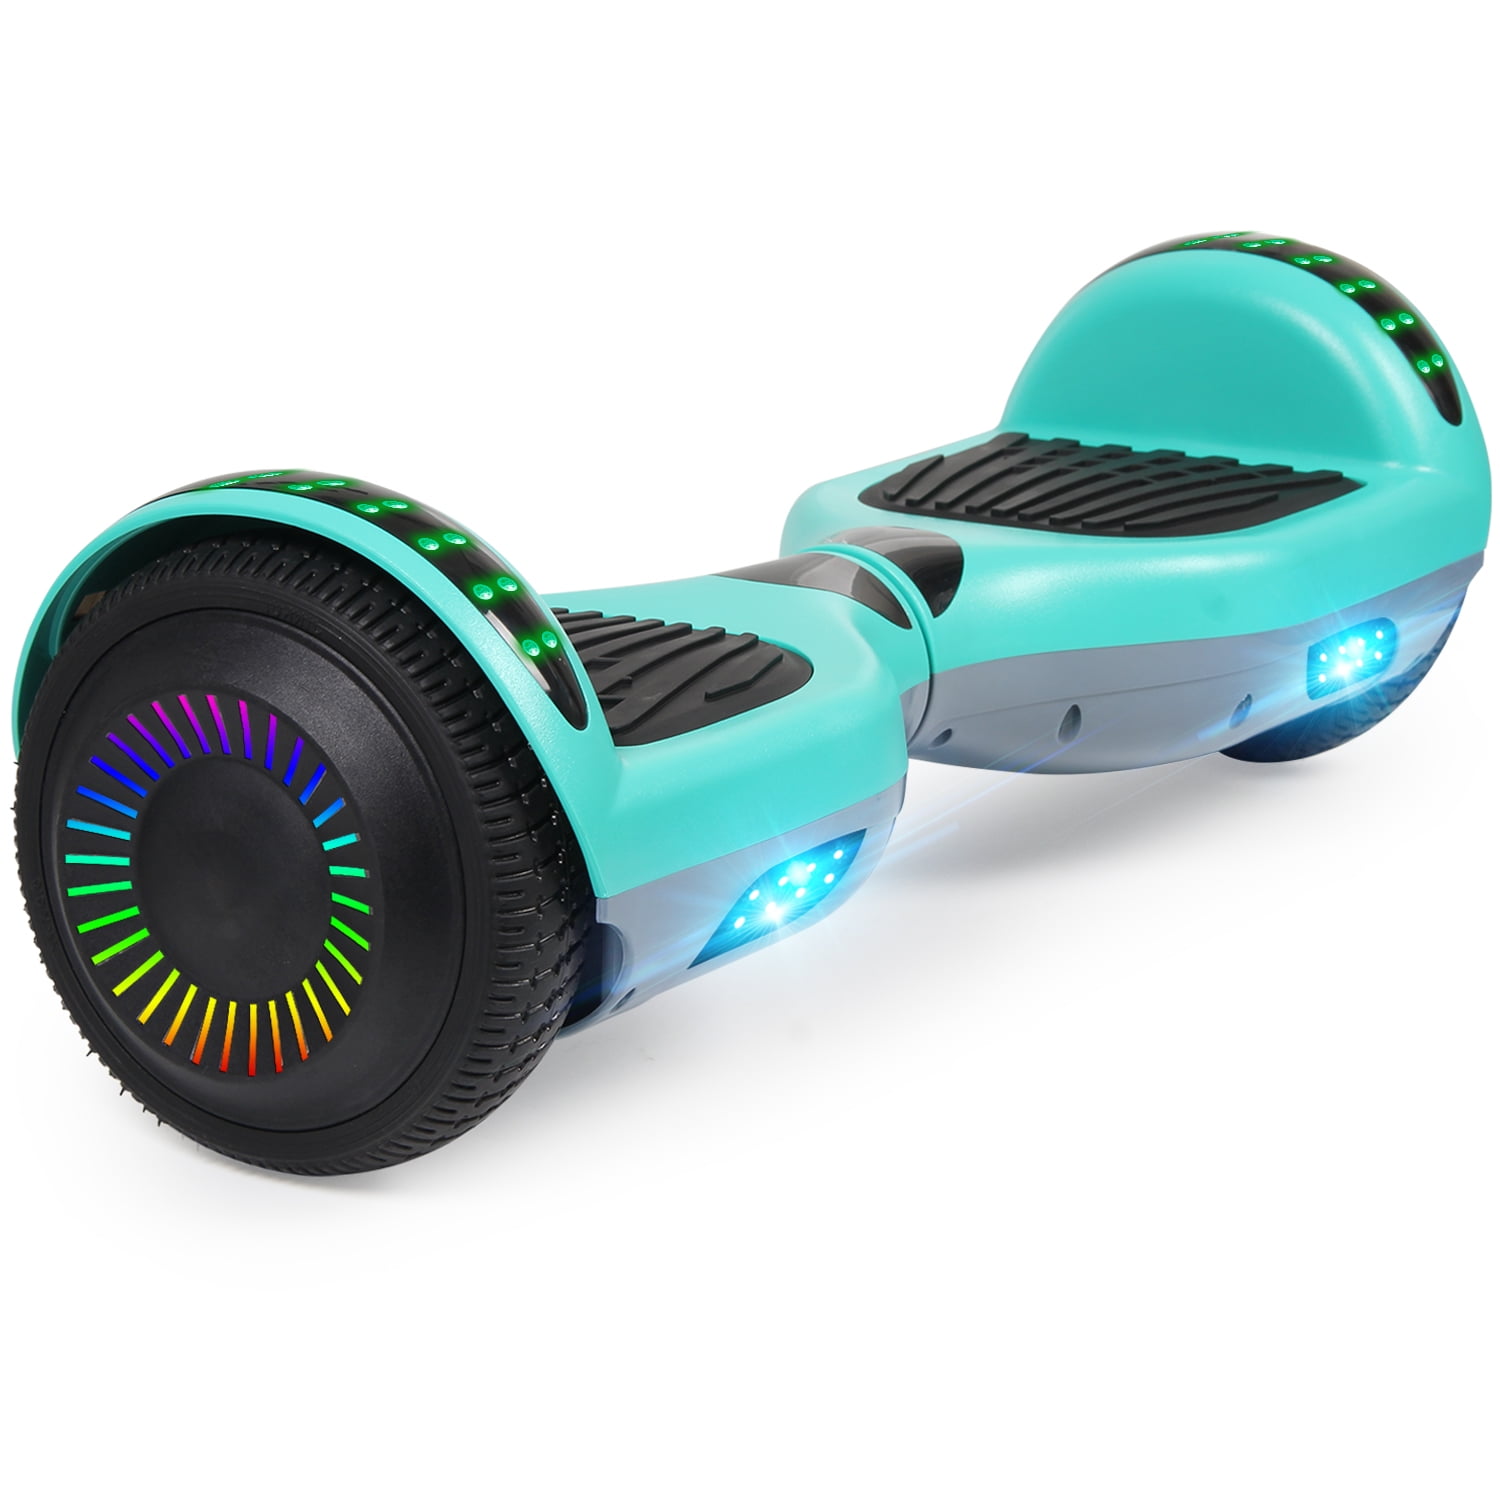 UL2272 Certified City Cruiser Hoverboard Dual Motors Electric Self Balancing Scooter with Built-in Speaker and LED Lights